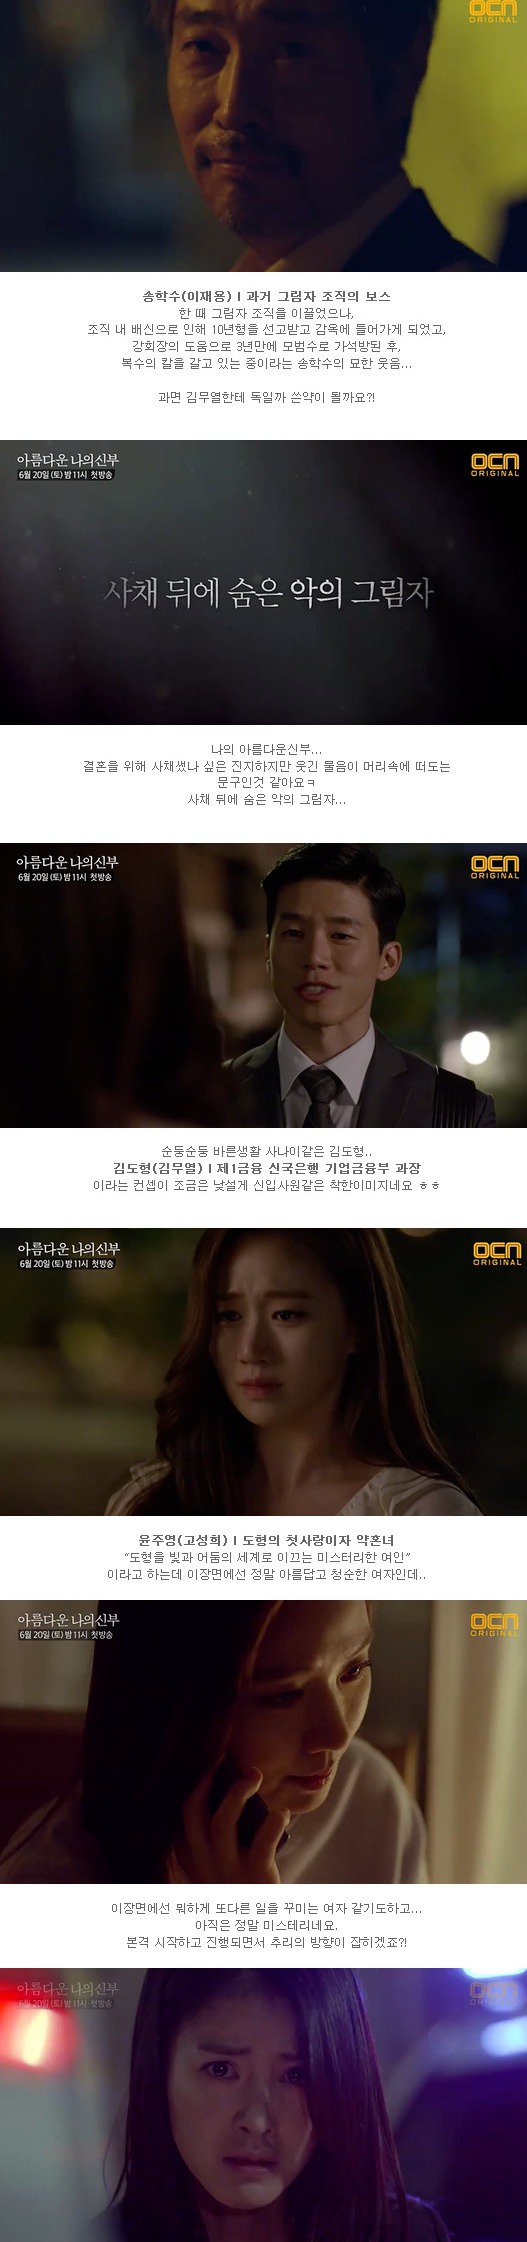 episodes 1 and 2 captures for the Korean drama 'My Beautiful Bride'